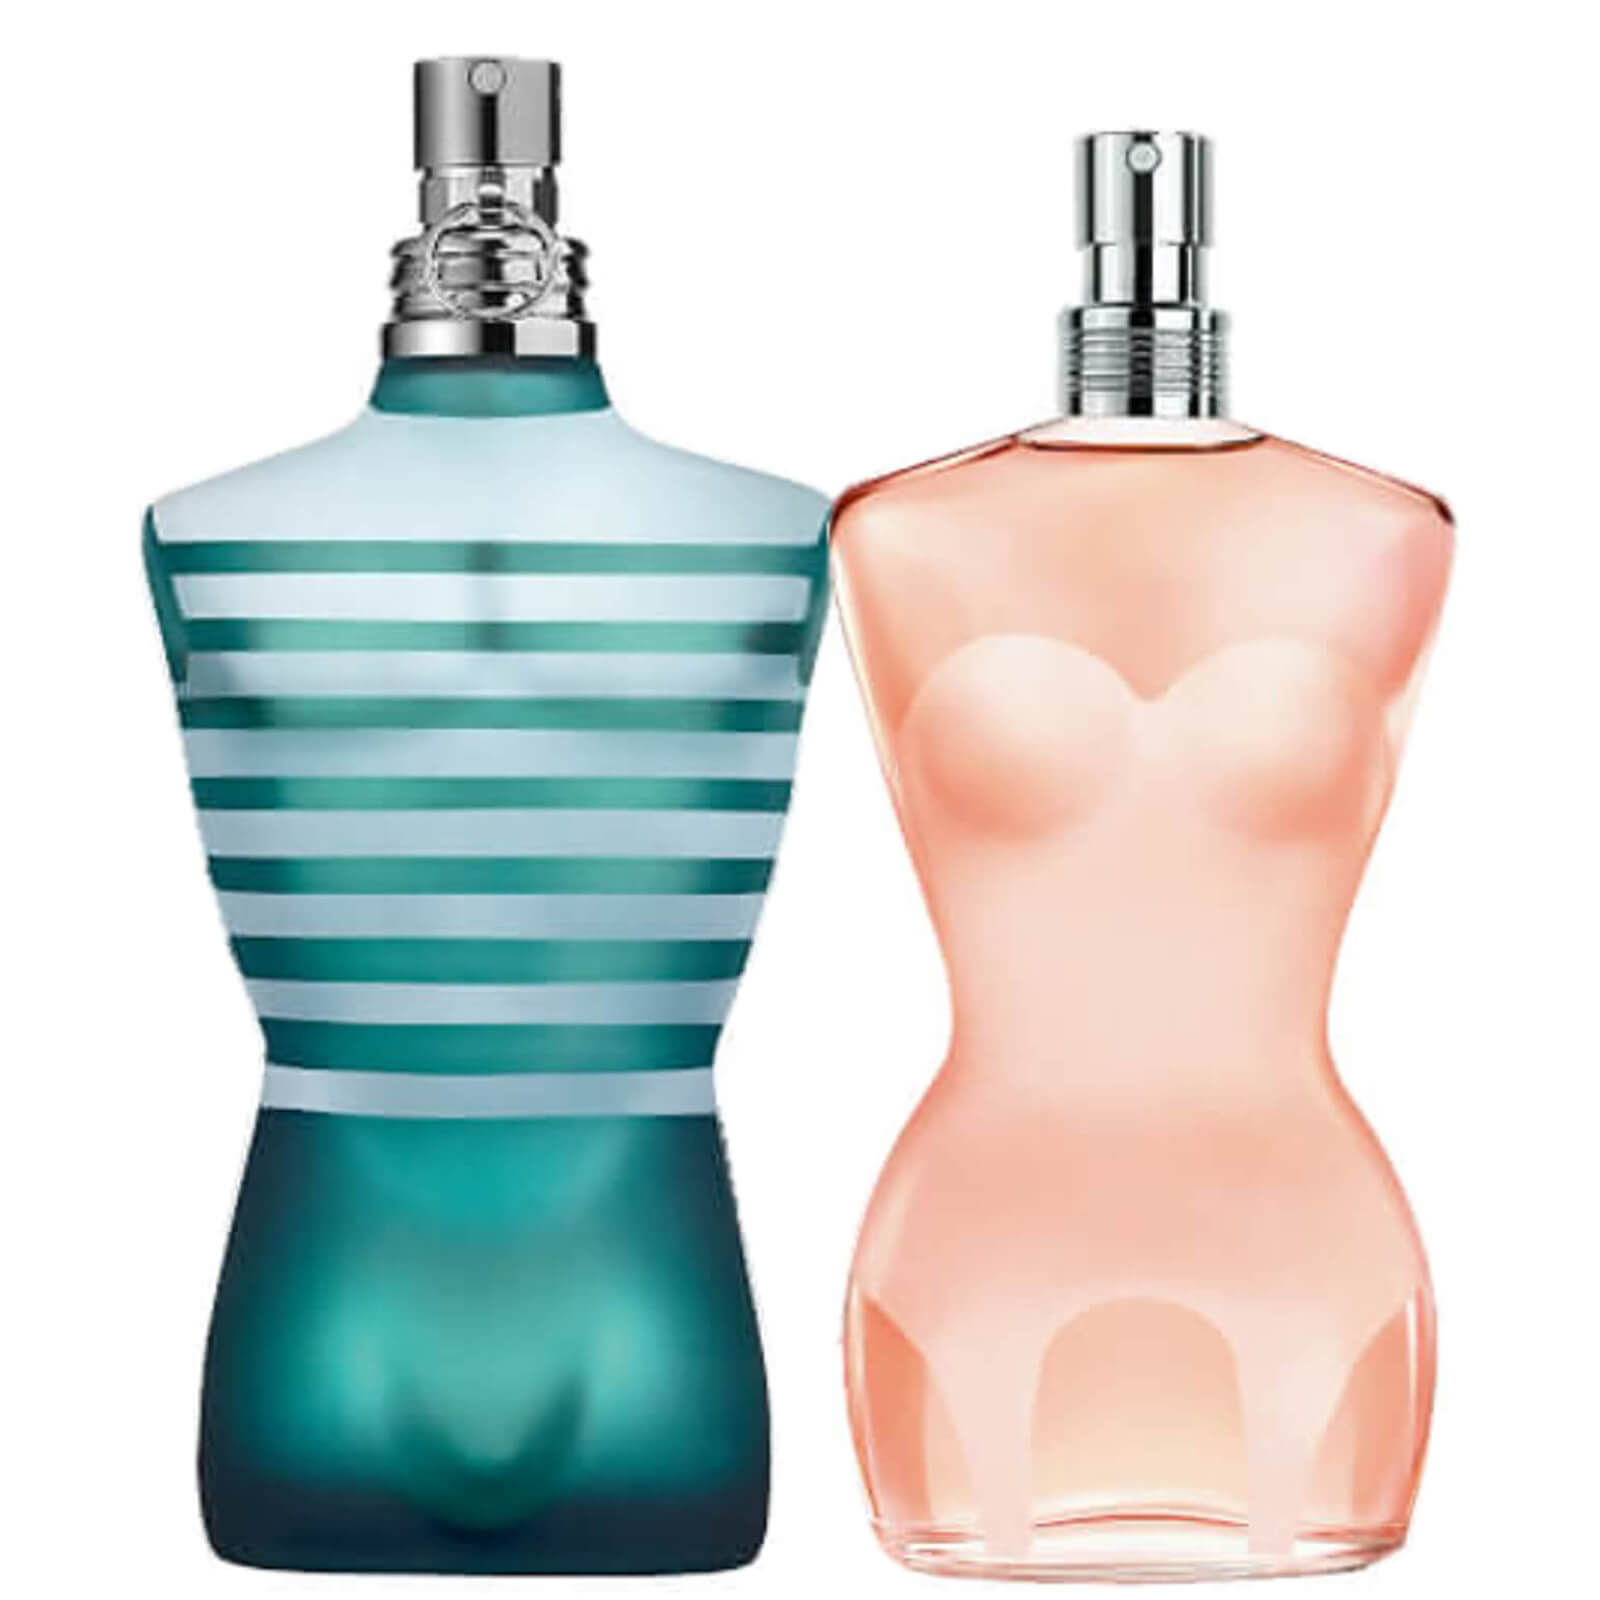 Jean Paul Gaultier His and Hers Limited Edition Bundle (Worth £157.00)